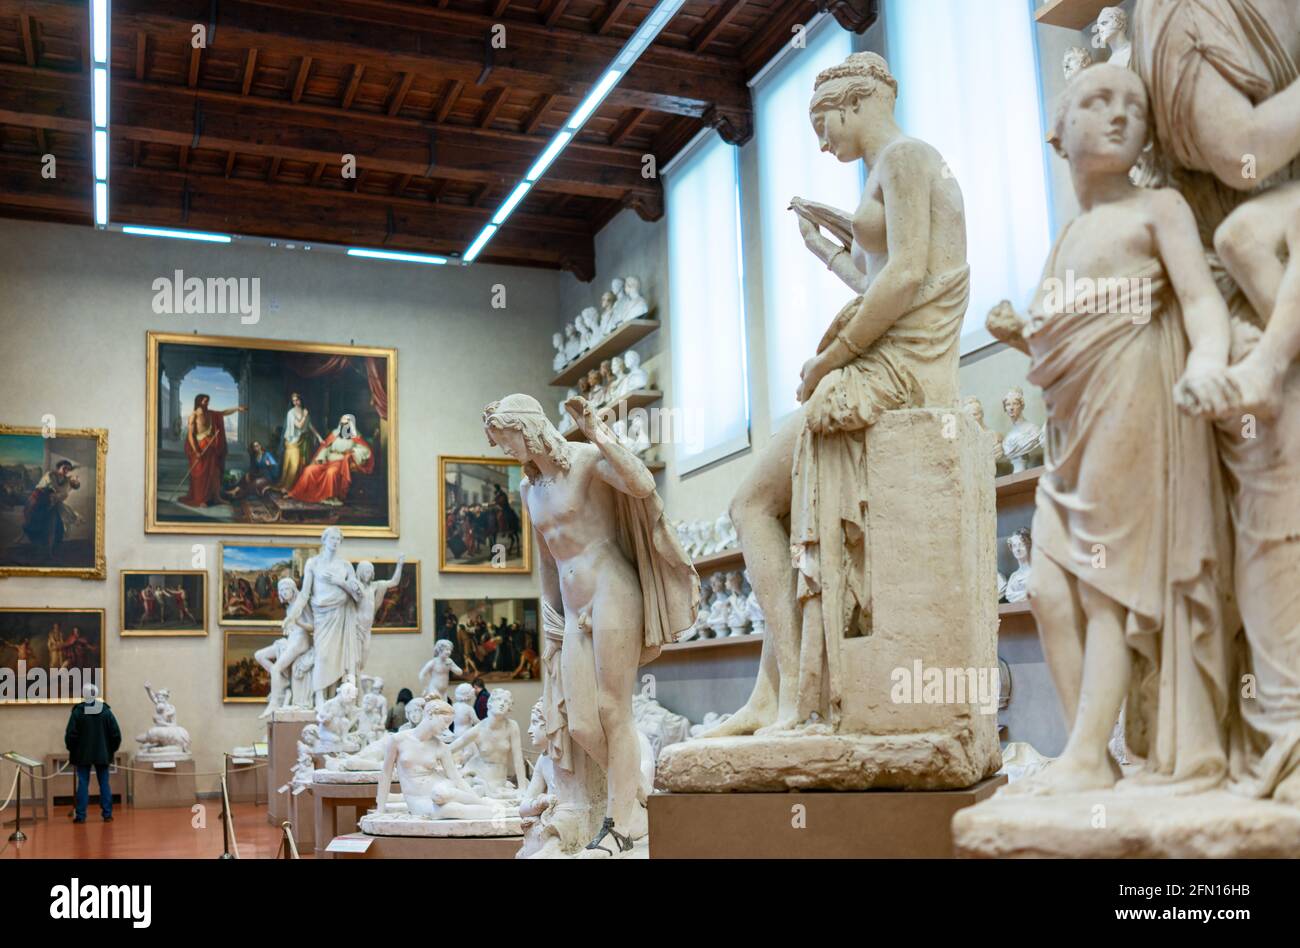 Florence, Italy, Accademia Gallery,the Gipsoteca with sculptures by Bartolini and his students sculptors Stock Photo